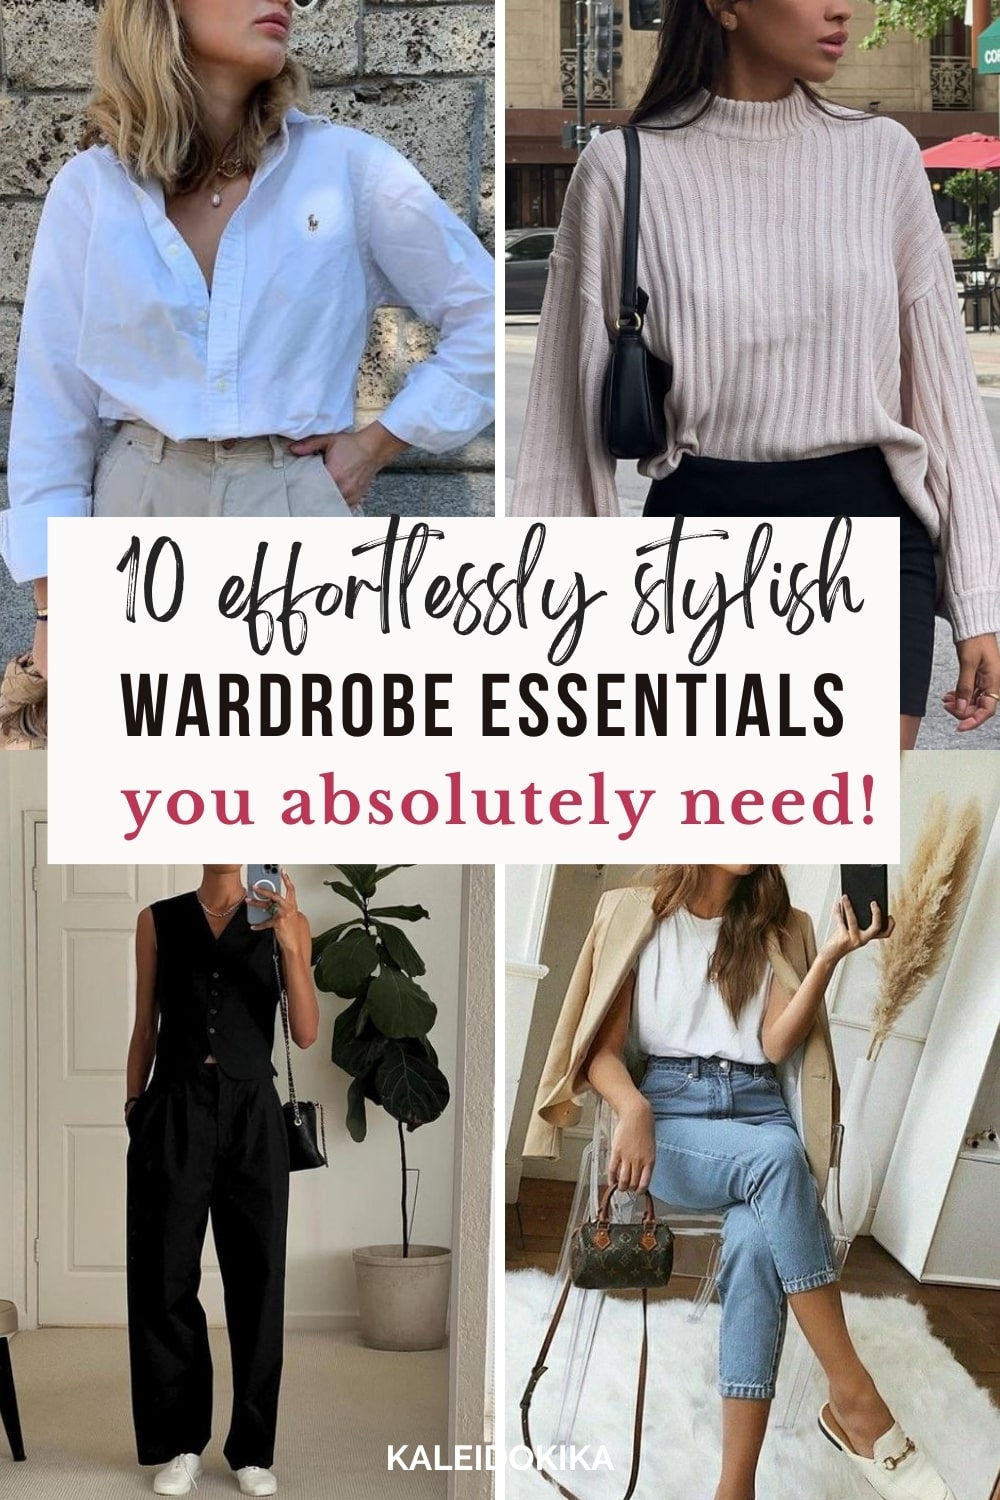 Image showing 10 wardrobe essentials for women that are a must have